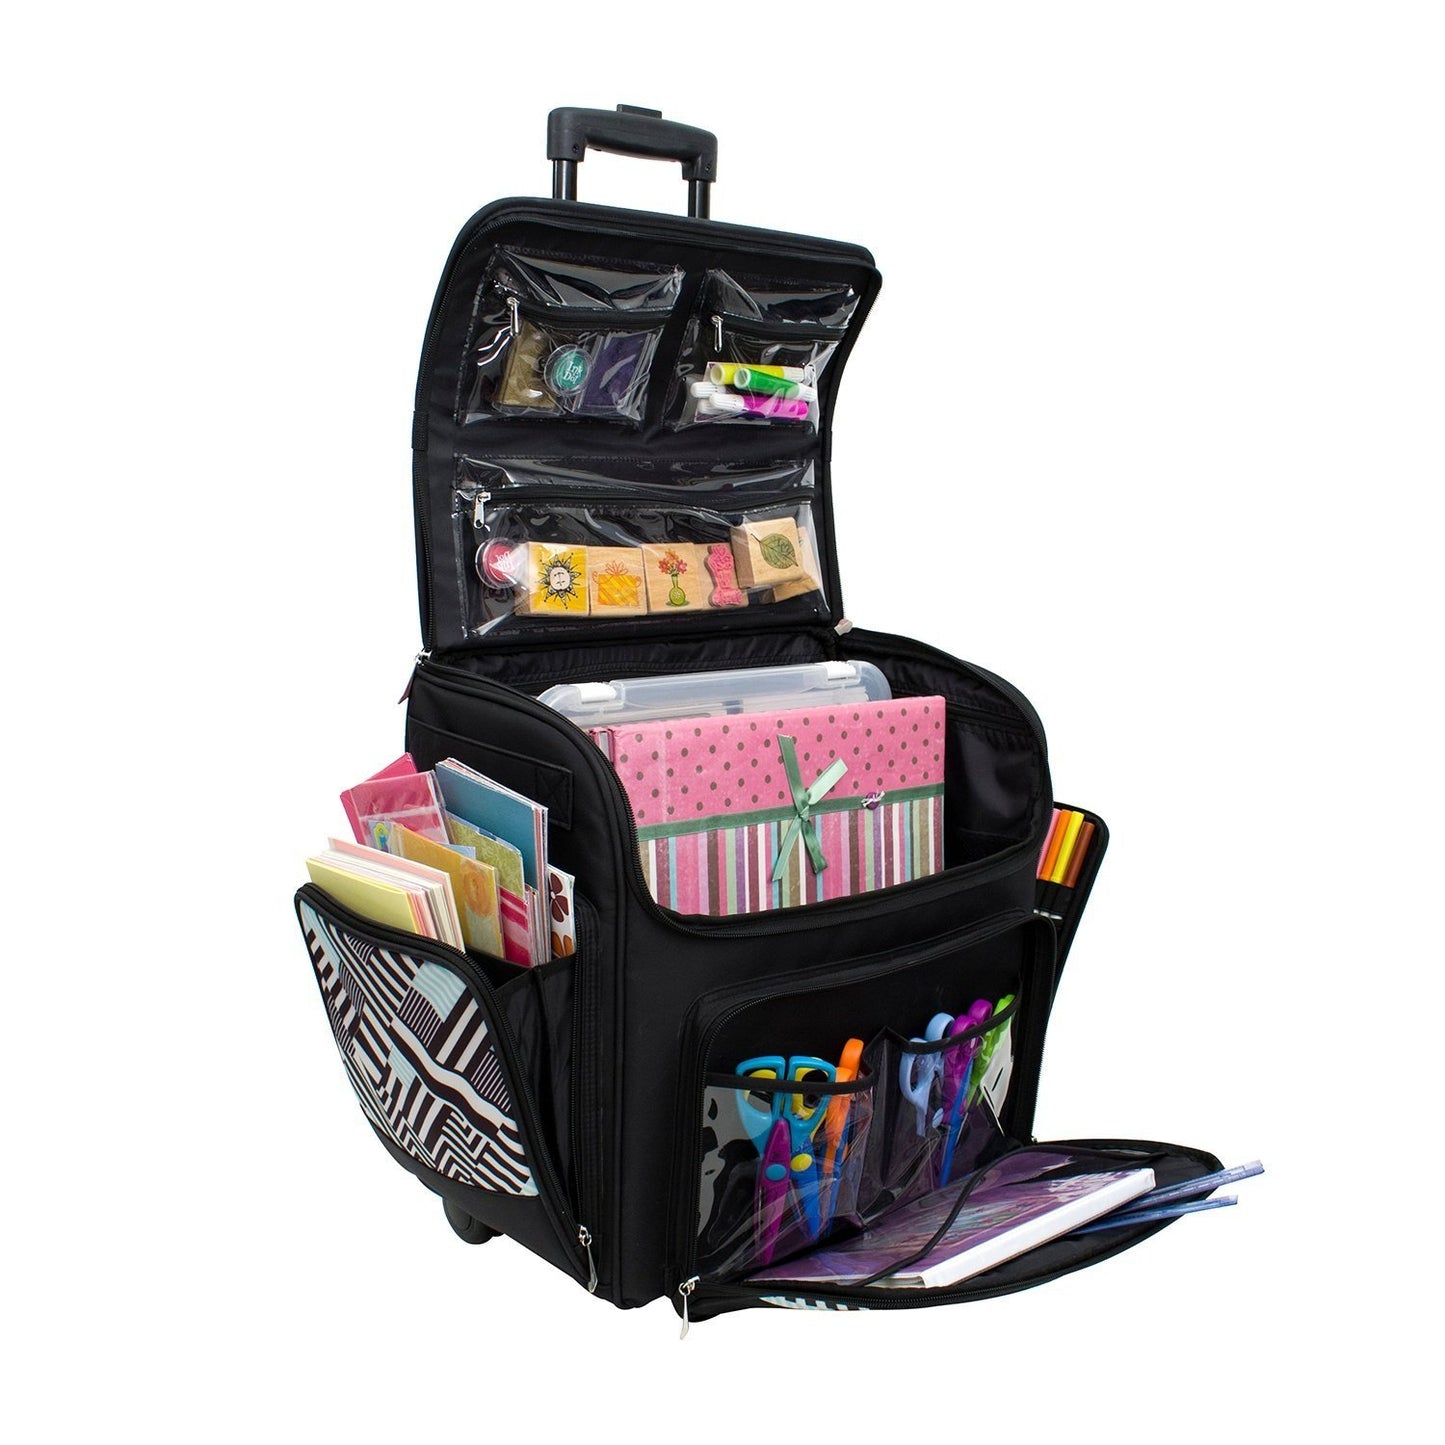 Featured everything mary wit deluxe teal geometric rolling organizer papercrafting storage tote for paper binder tools scissors stamps telescoping handle with dual wheels craft case